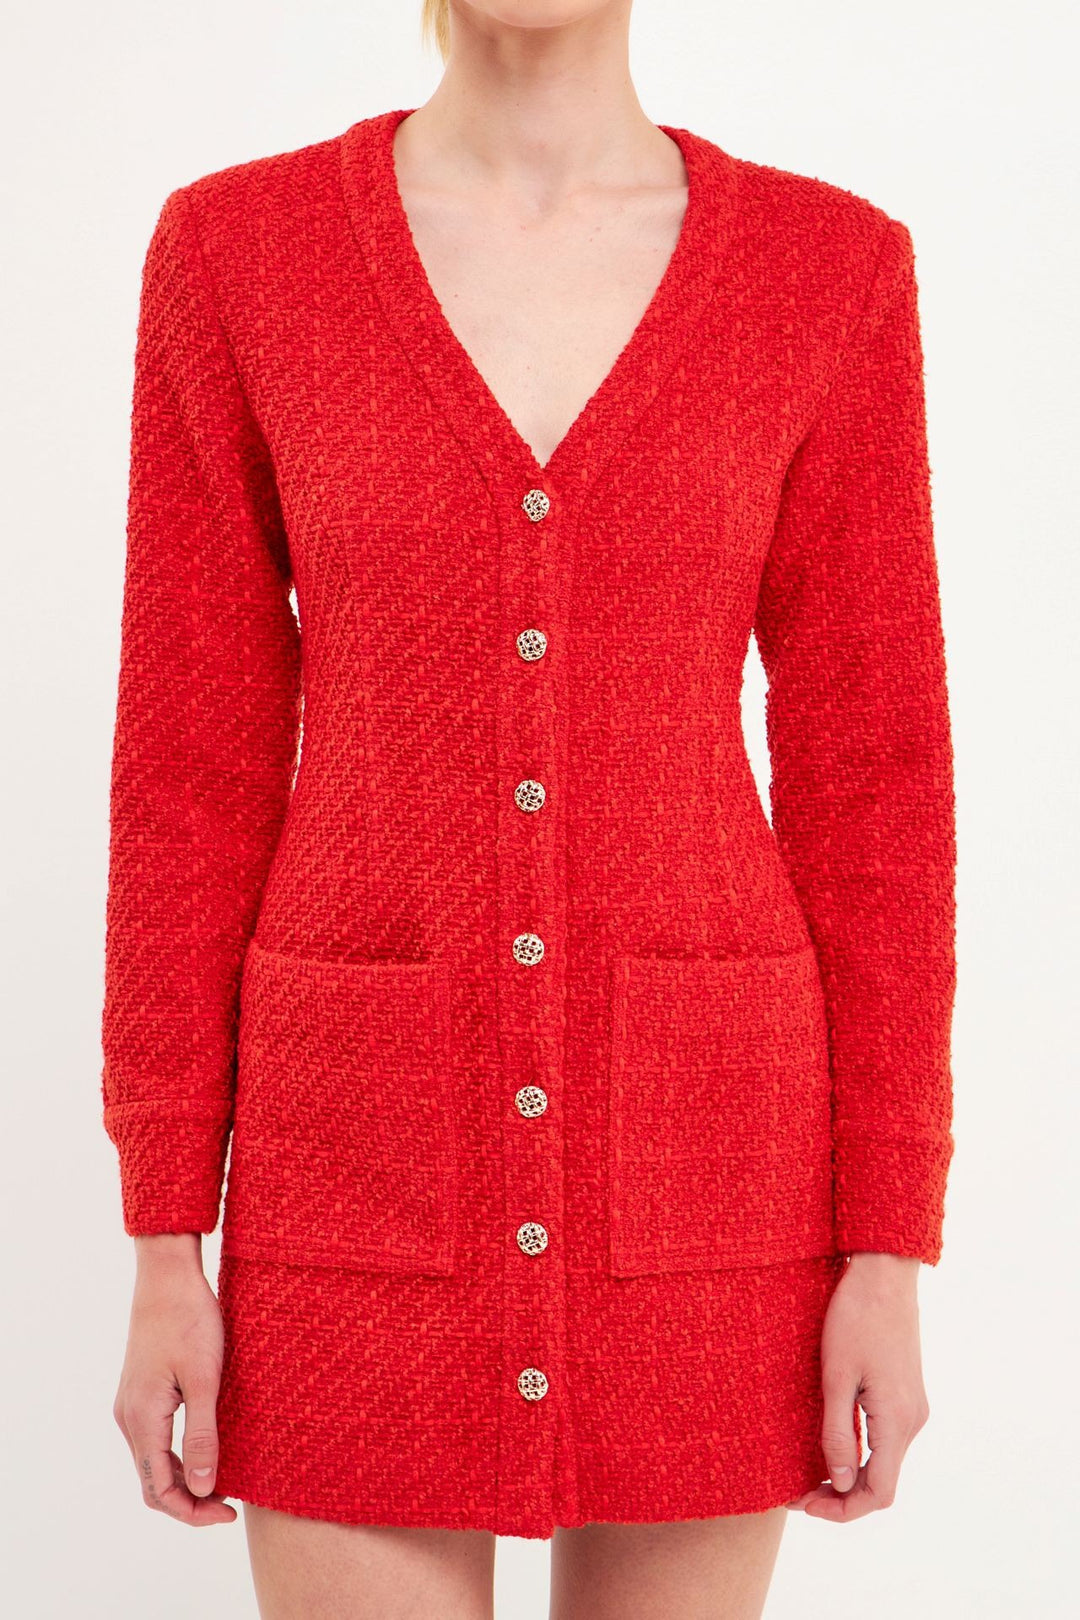 Textured Button Down Dress in Red